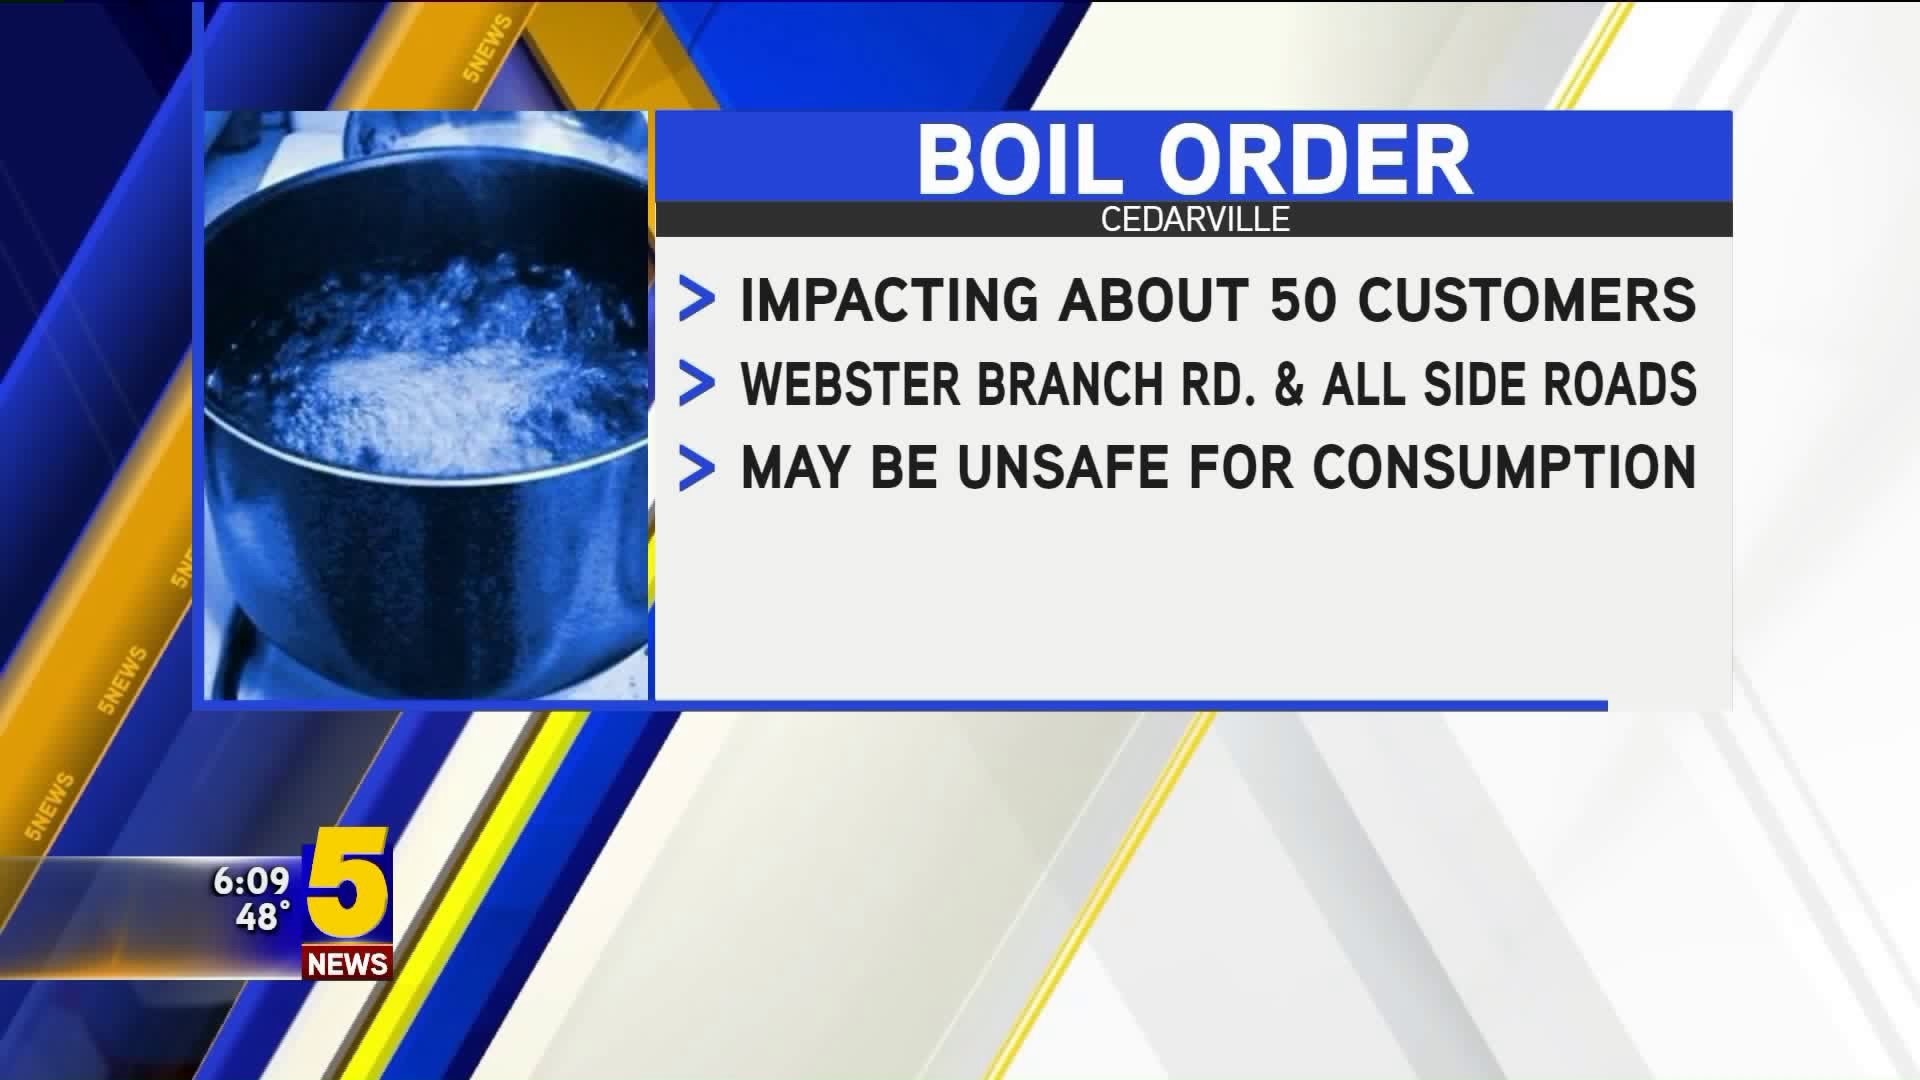 Boil Order Issues For Part Of Cedarville